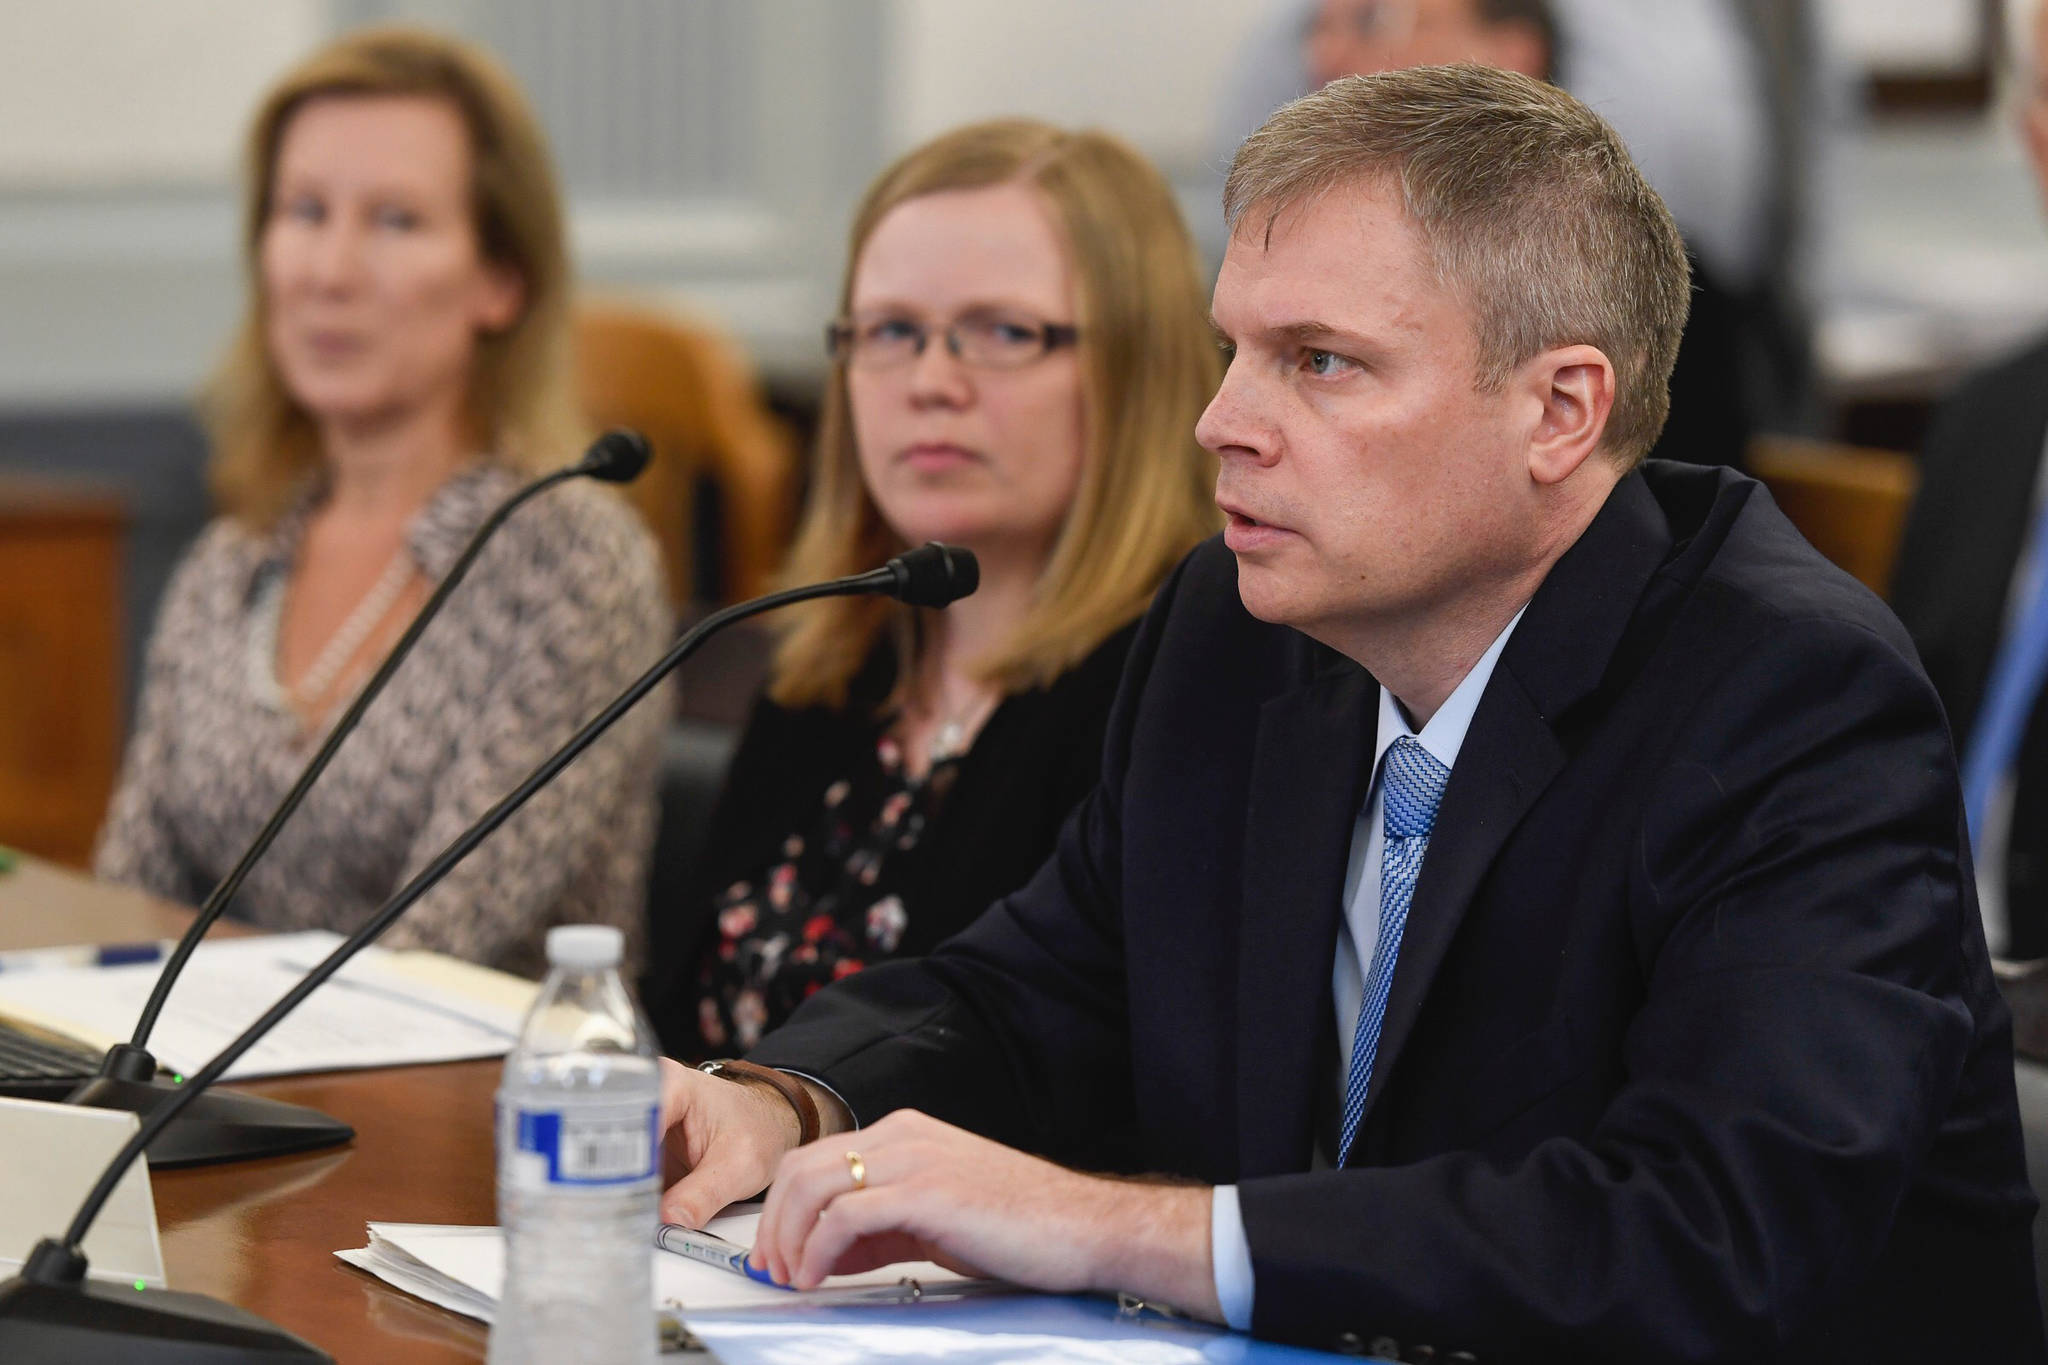 Dr. Michael Johnson, Commissioner of Alaska Department of Education and Early Development, speaks about a reduced funding for education to the Senate Finance Committee at the Capitol on Monday Feb. 18, 2019. (Michael Penn/ Juneau Empire)